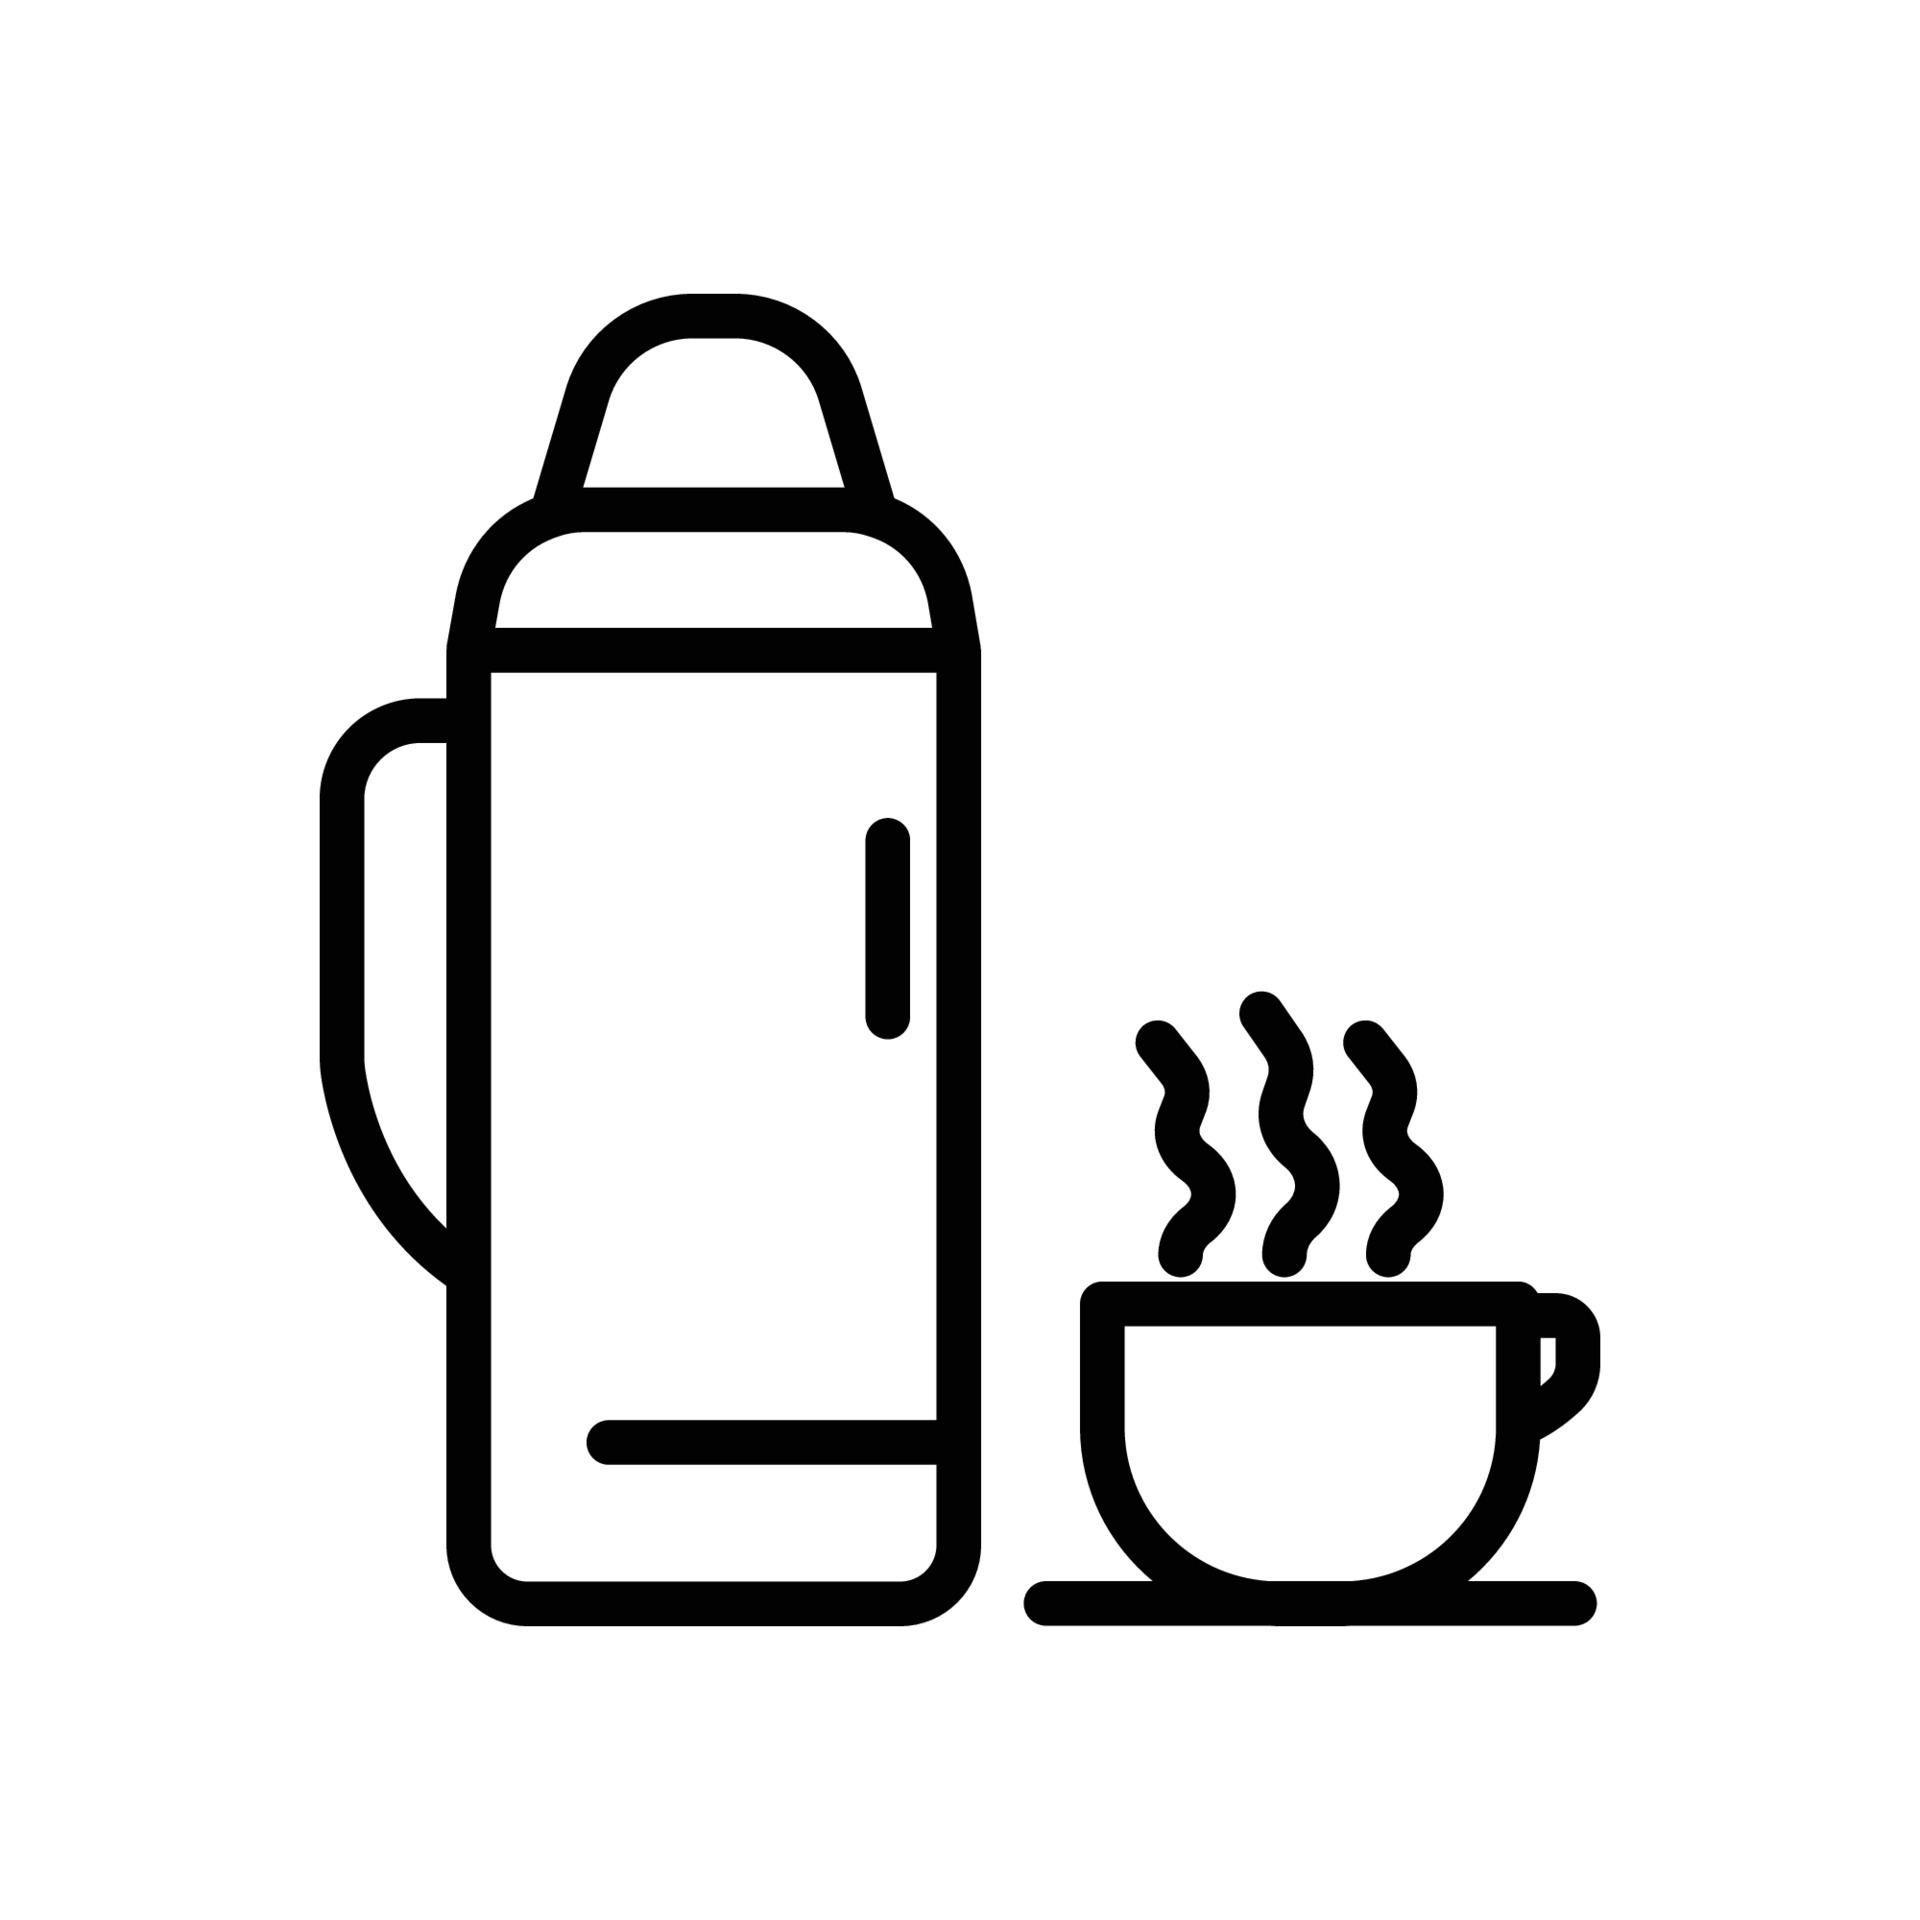 https://static.vecteezy.com/system/resources/previews/007/675/163/original/hot-water-thermos-and-coffee-cup-icon-hot-drink-line-icon-style-simple-design-editable-design-simple-illustration-vector.jpg